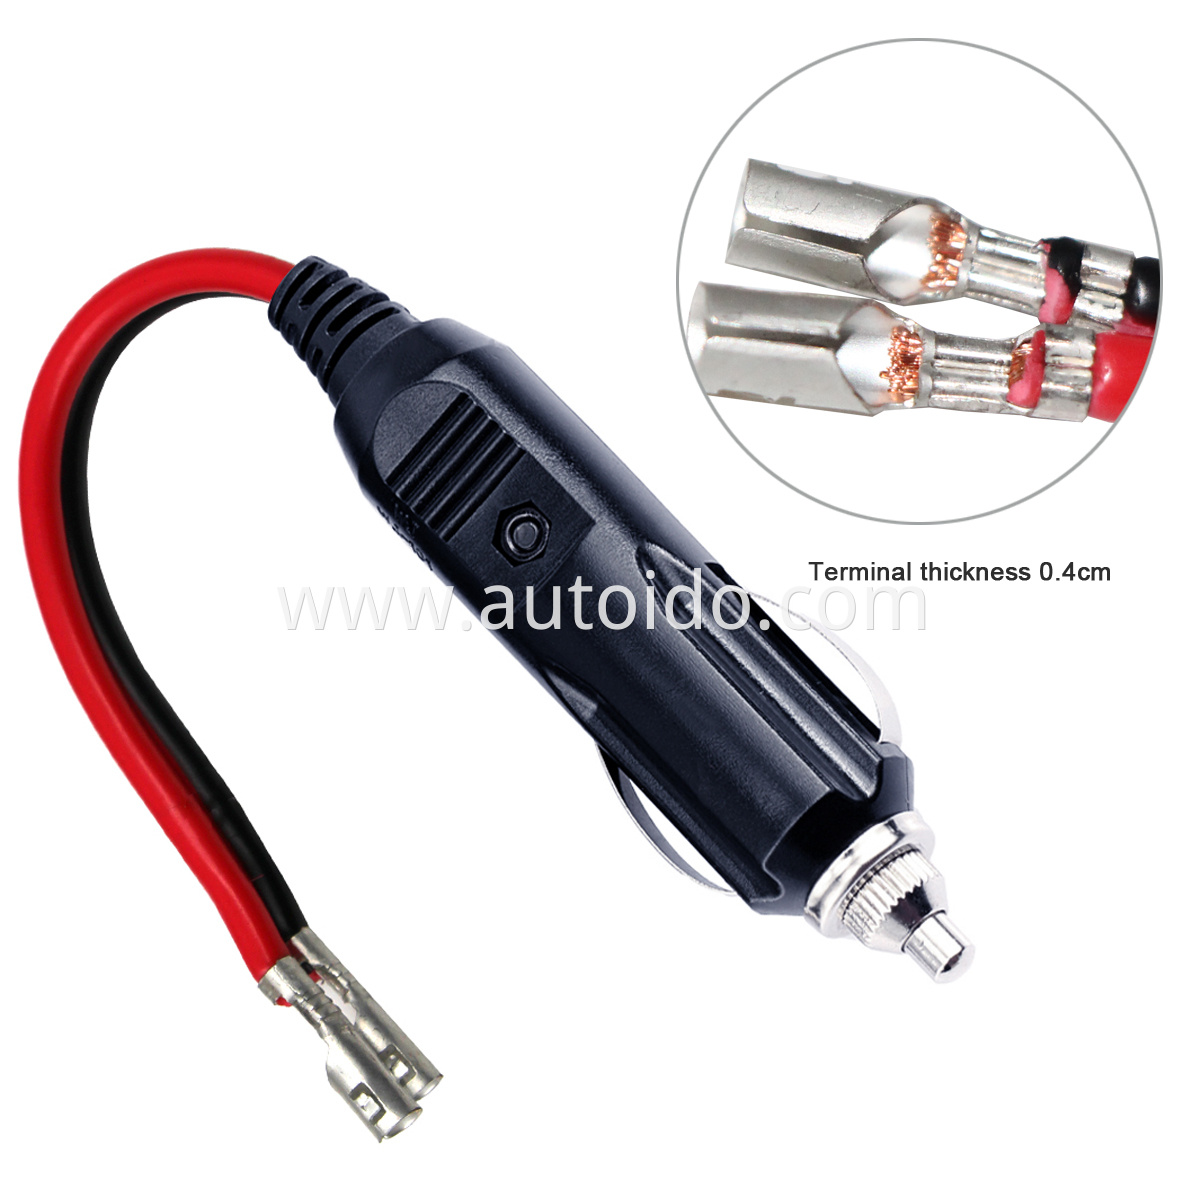 12V/24V 10A/15A Fuse Circuit TAP and Battery Eyelet Terminals to Car Cigarette Lighter Socket Cable